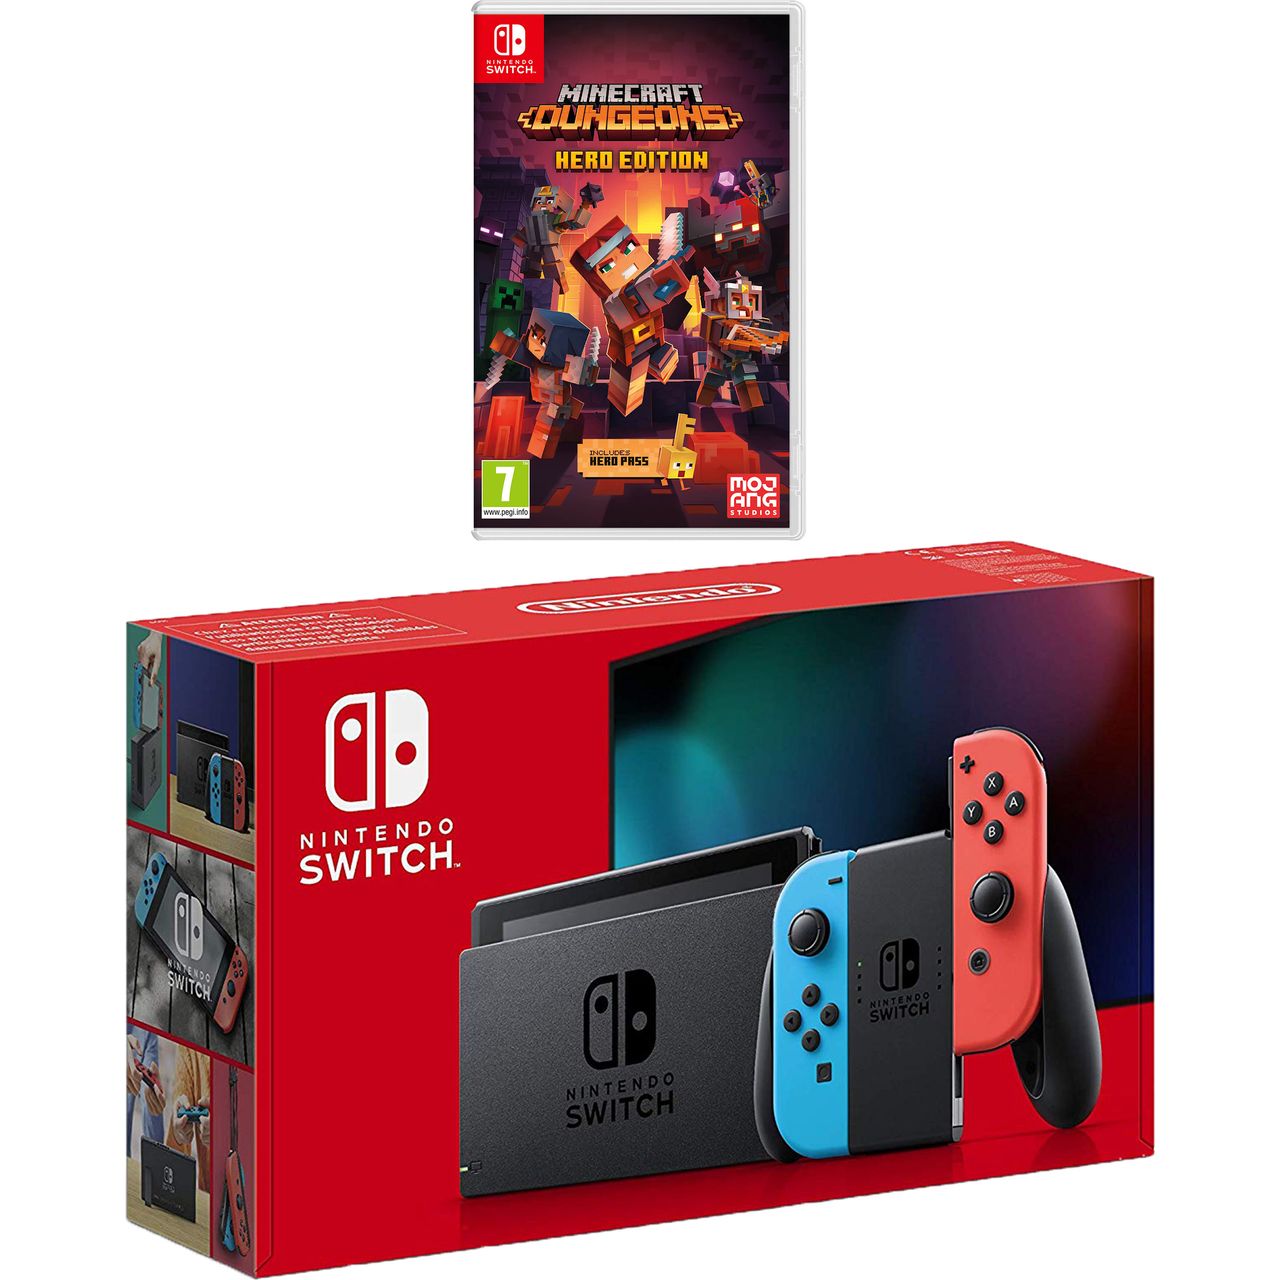 Nintendo Switch 32GB with Minecraft Dungeons Review